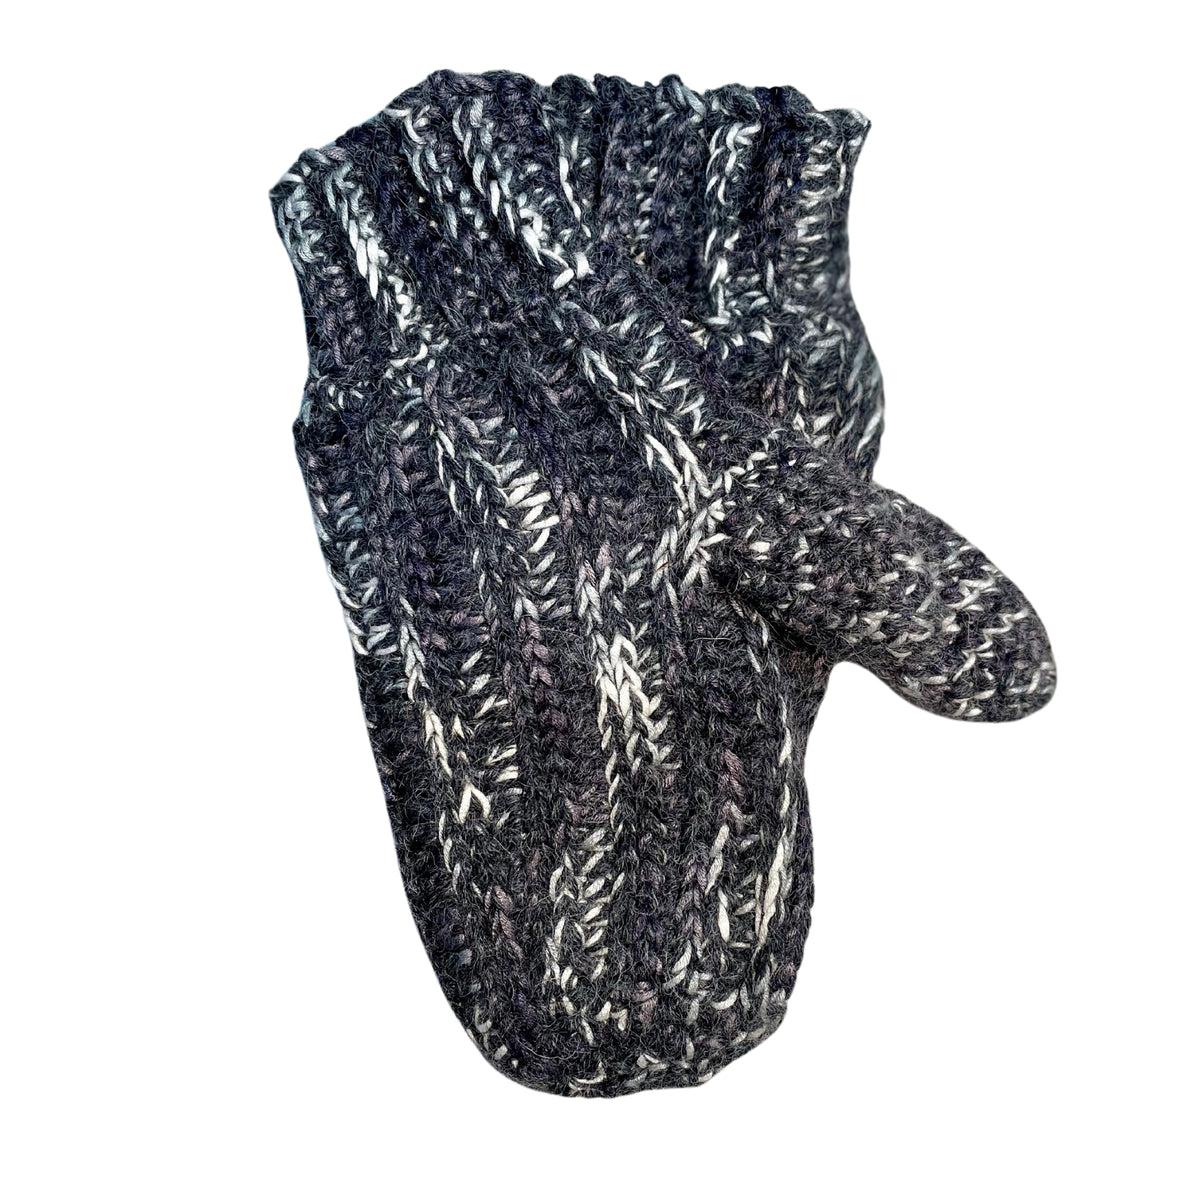 Alpacas of Montana black, charcoal, dark gray, light gray, and white colored cozy soft warm handmade knitted crochet ribbed mittens made in Montana out of alpaca yarn and bamboo yarn.